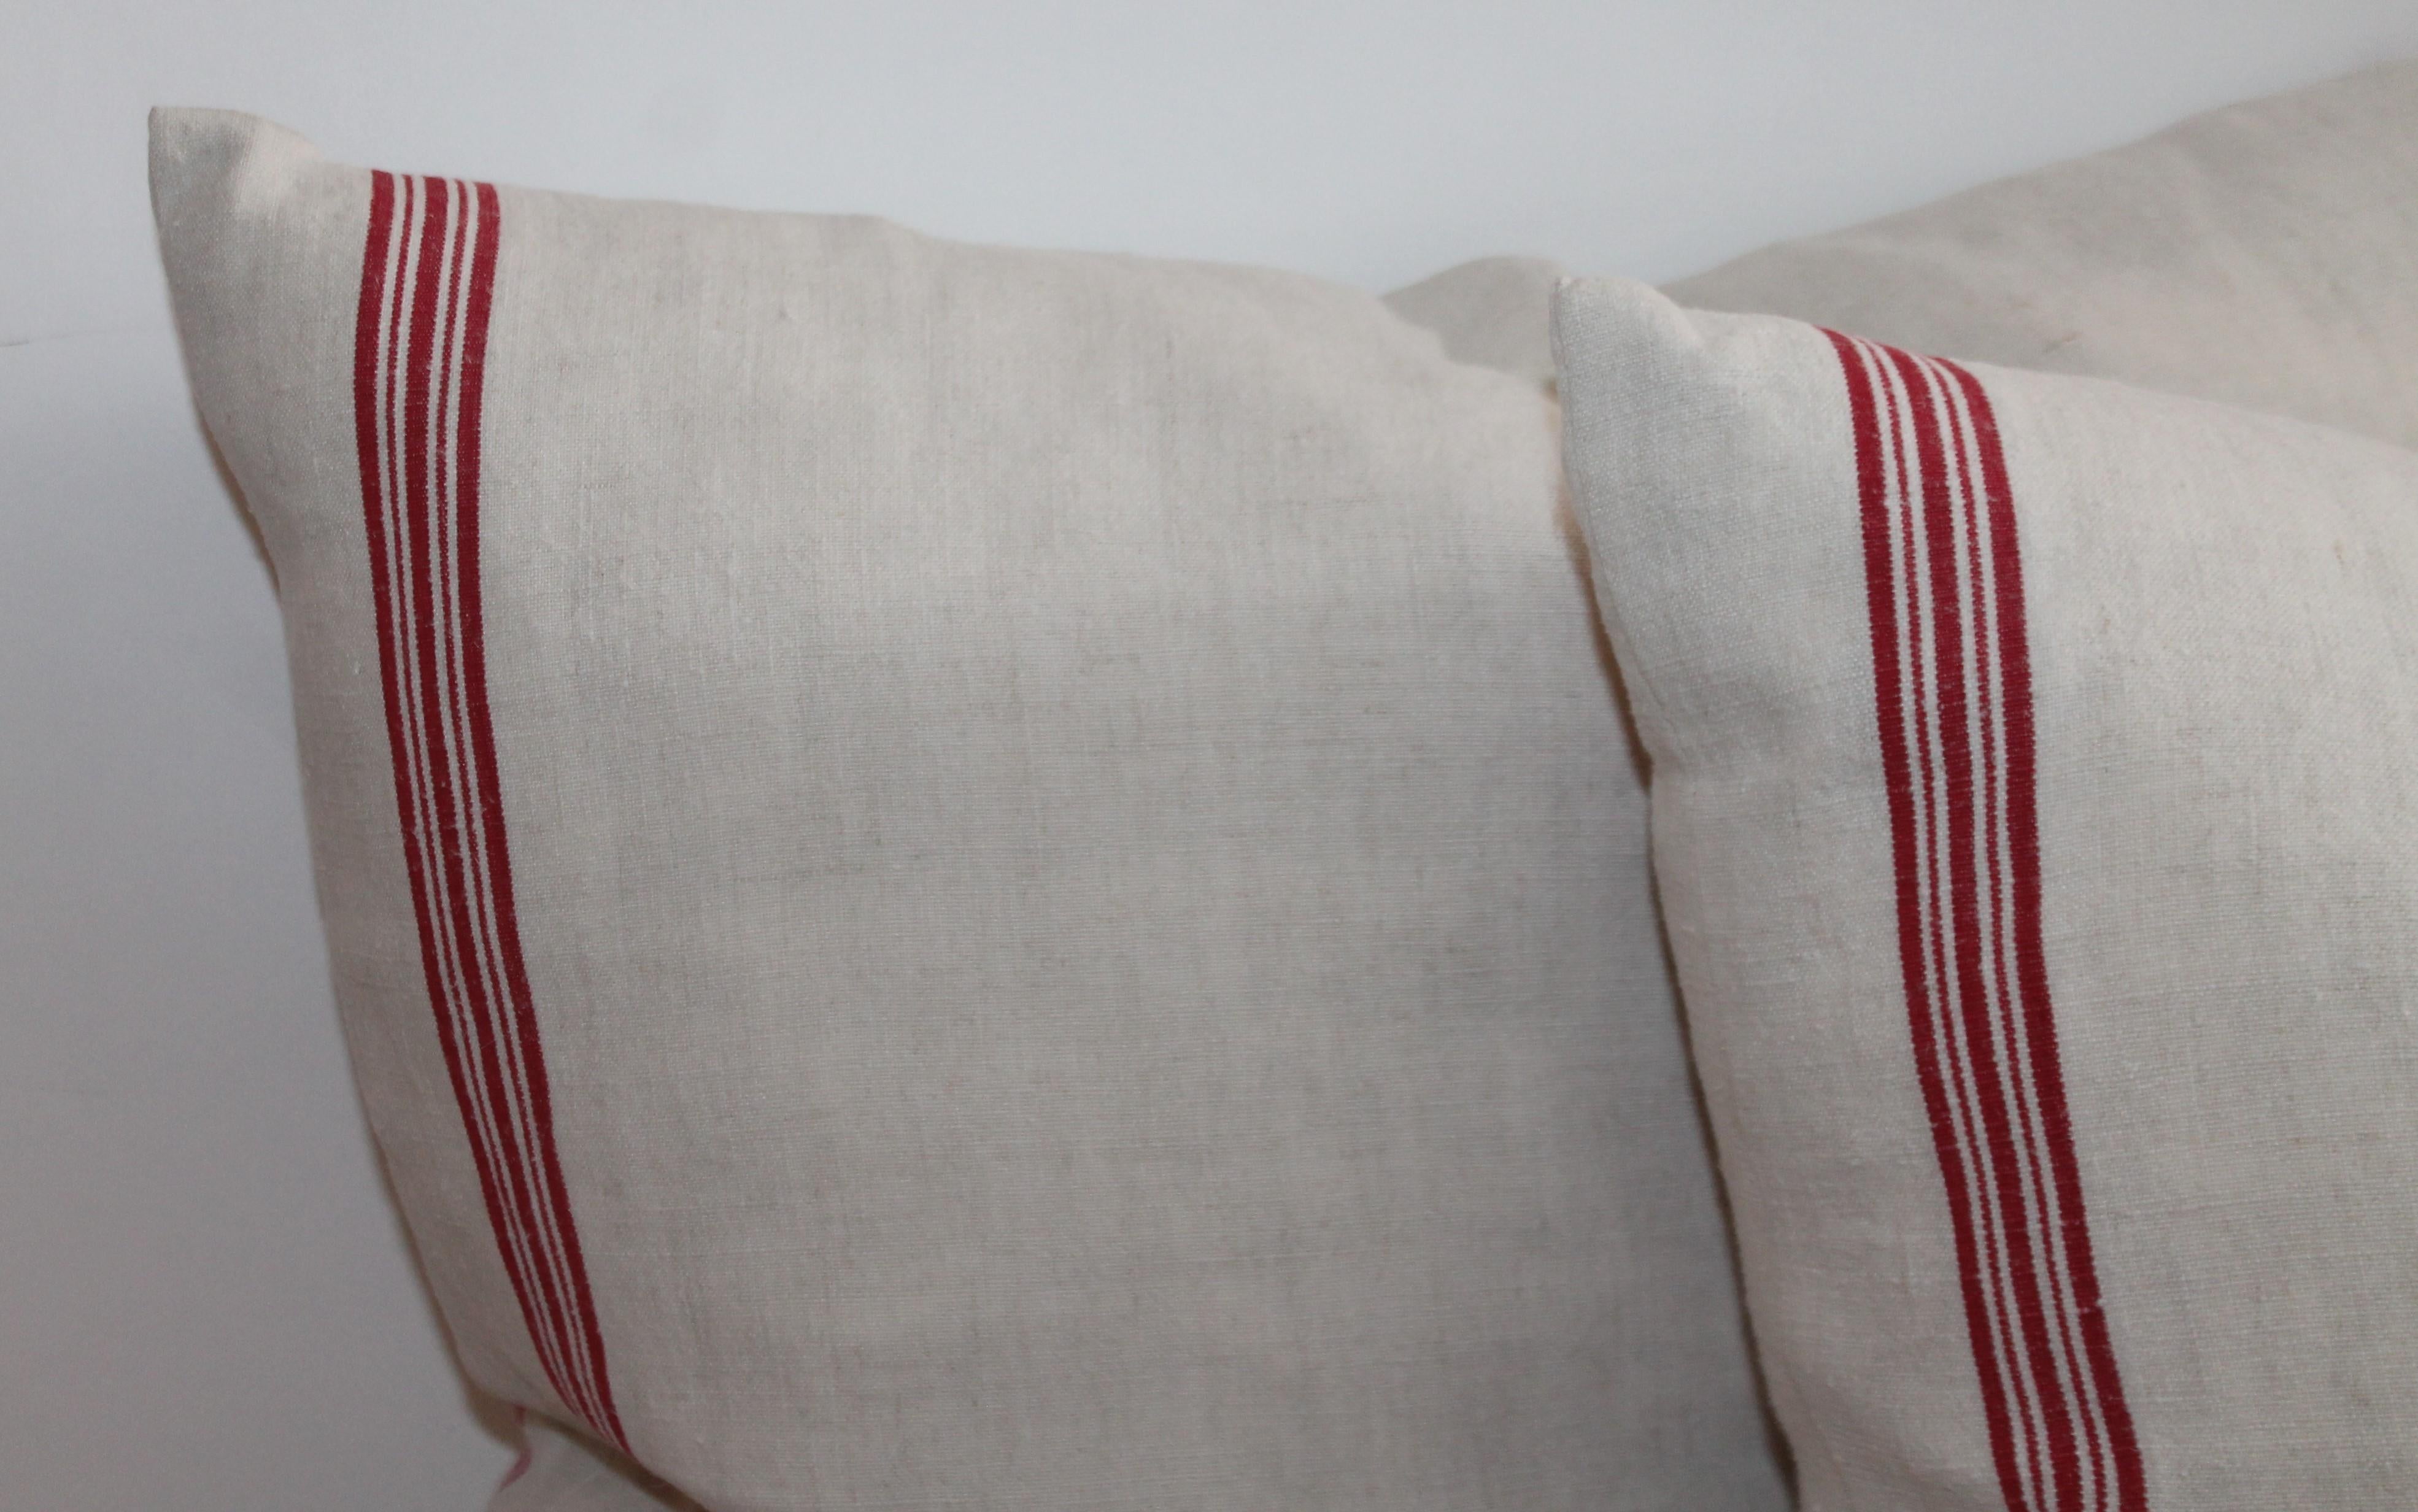 19th century double sided red & white stripped linen ticking pillows. The condition is pristine. Only one pair in stock.